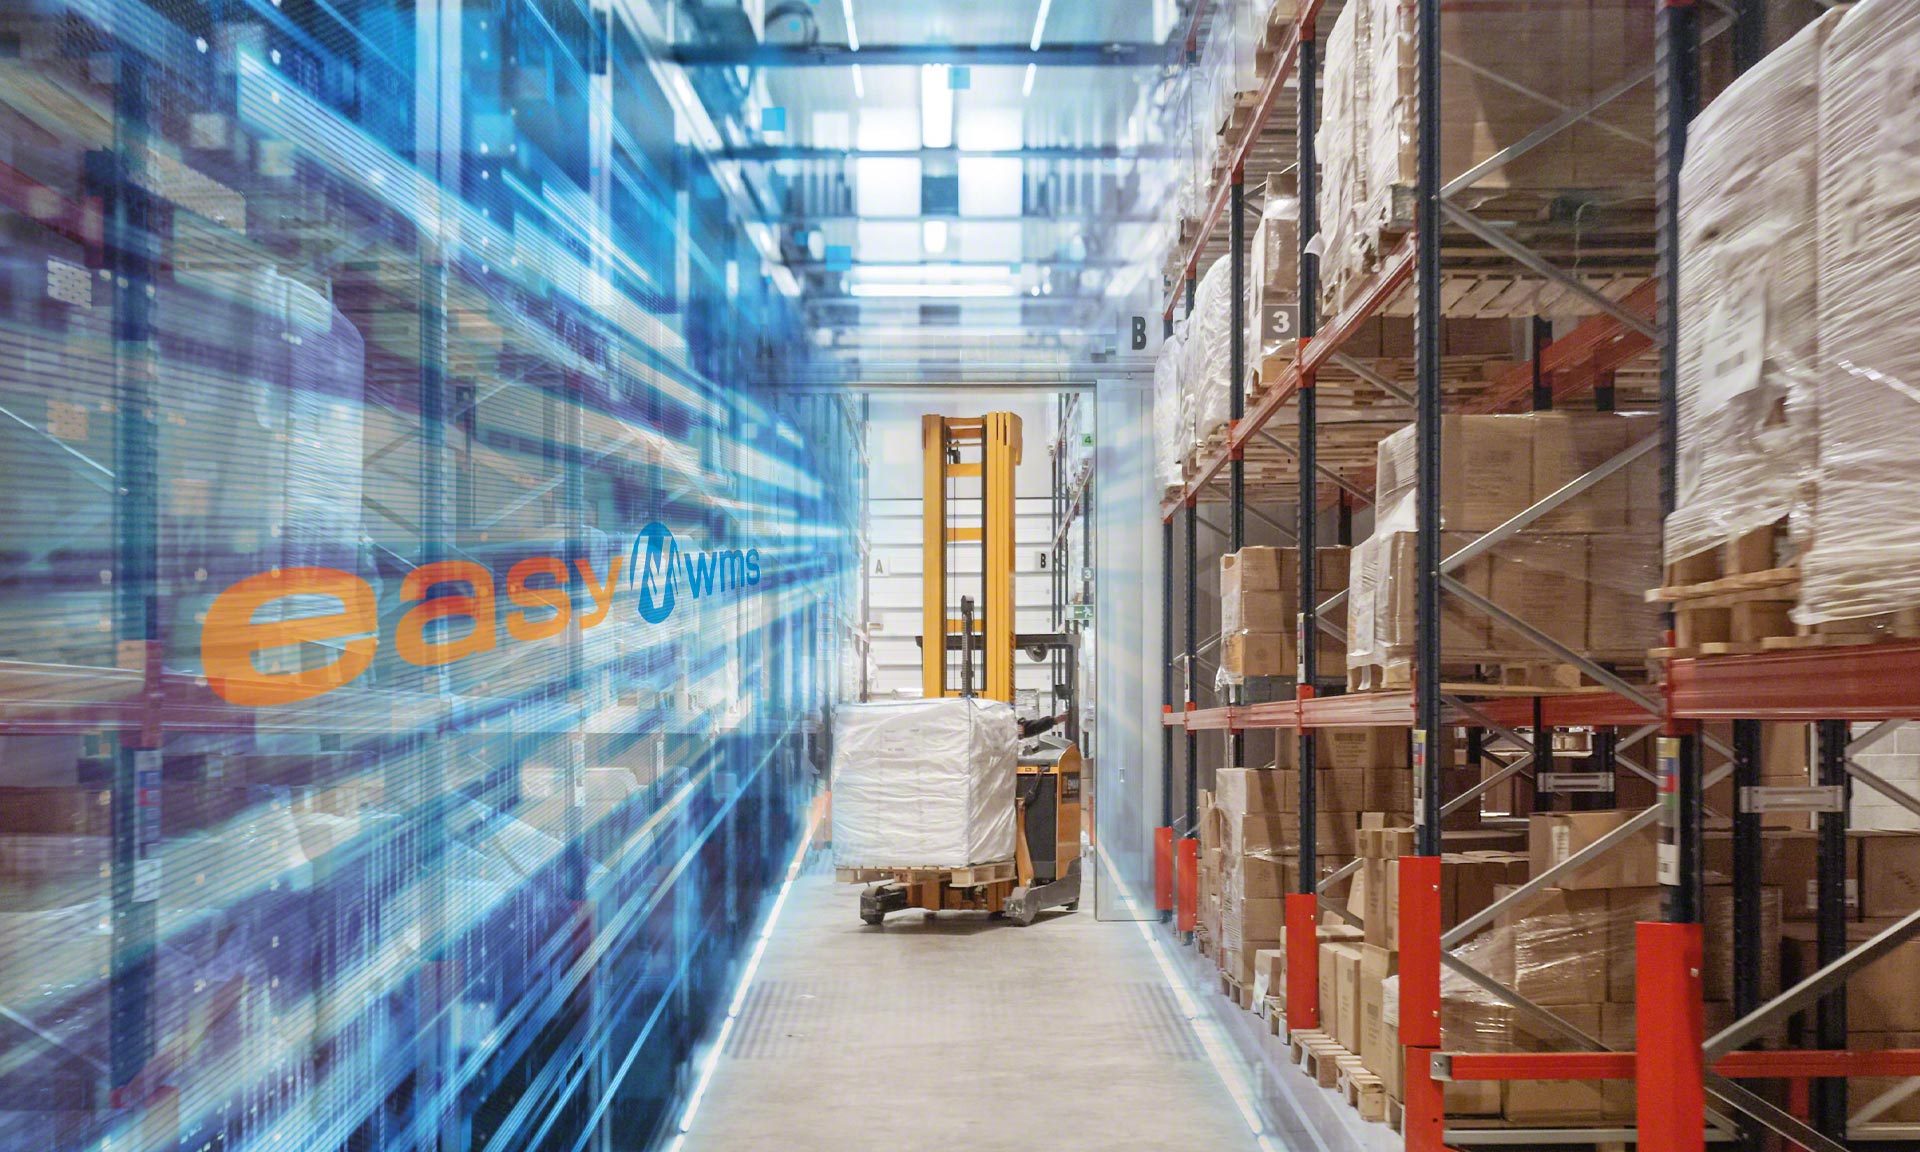 Packaging company Intermark eliminates errors in its digitized warehouse